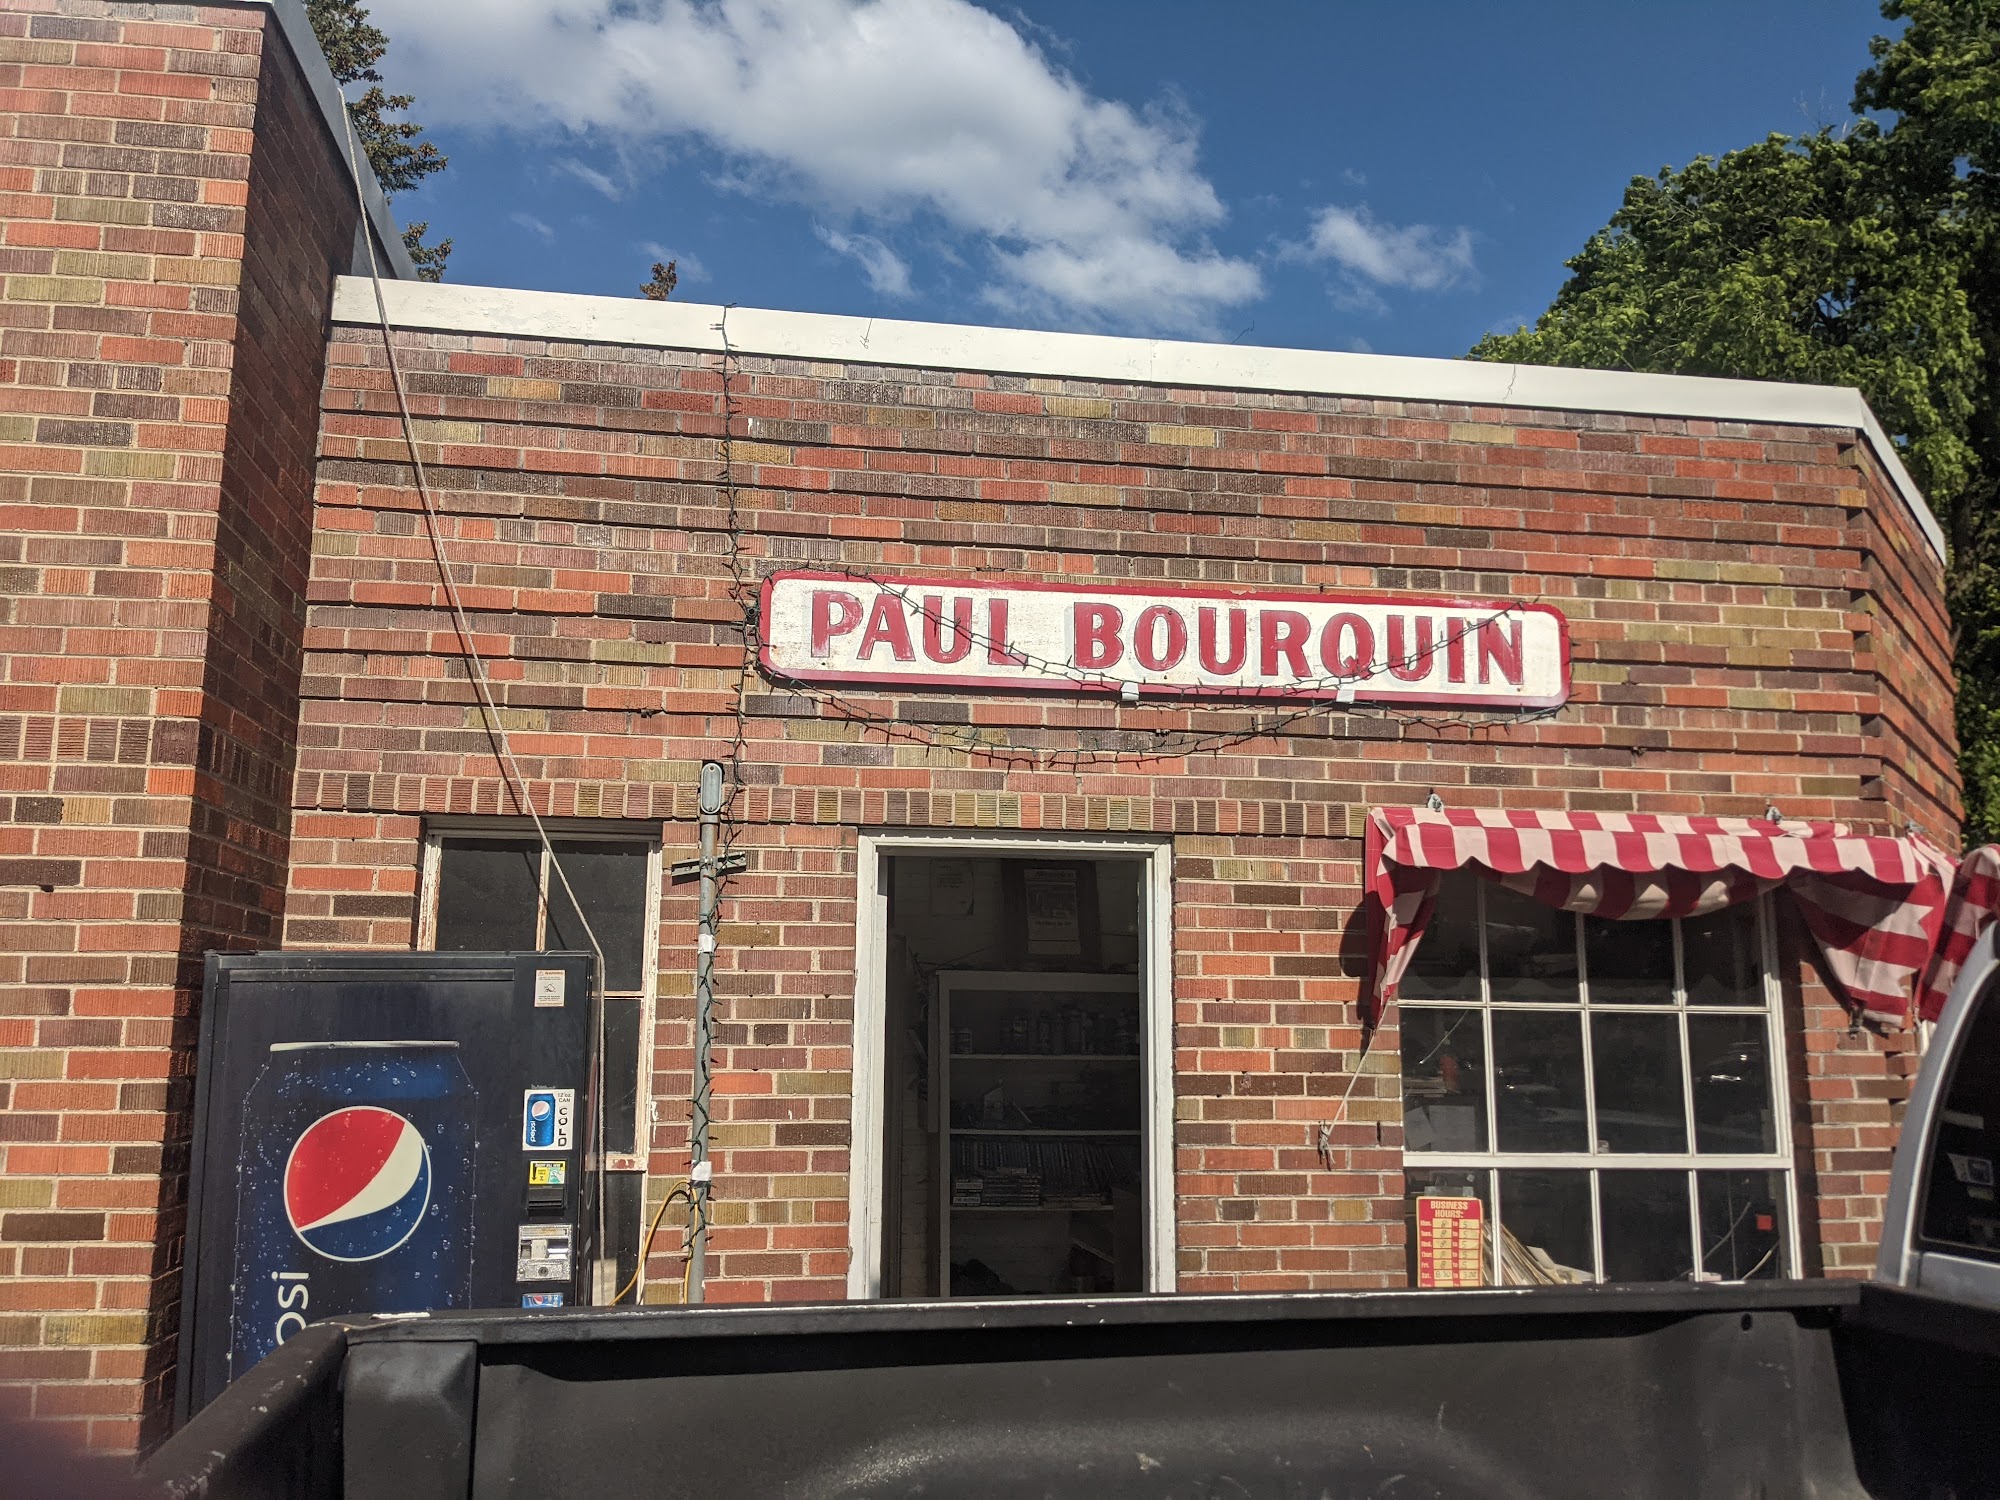 Bourquin's Service Station